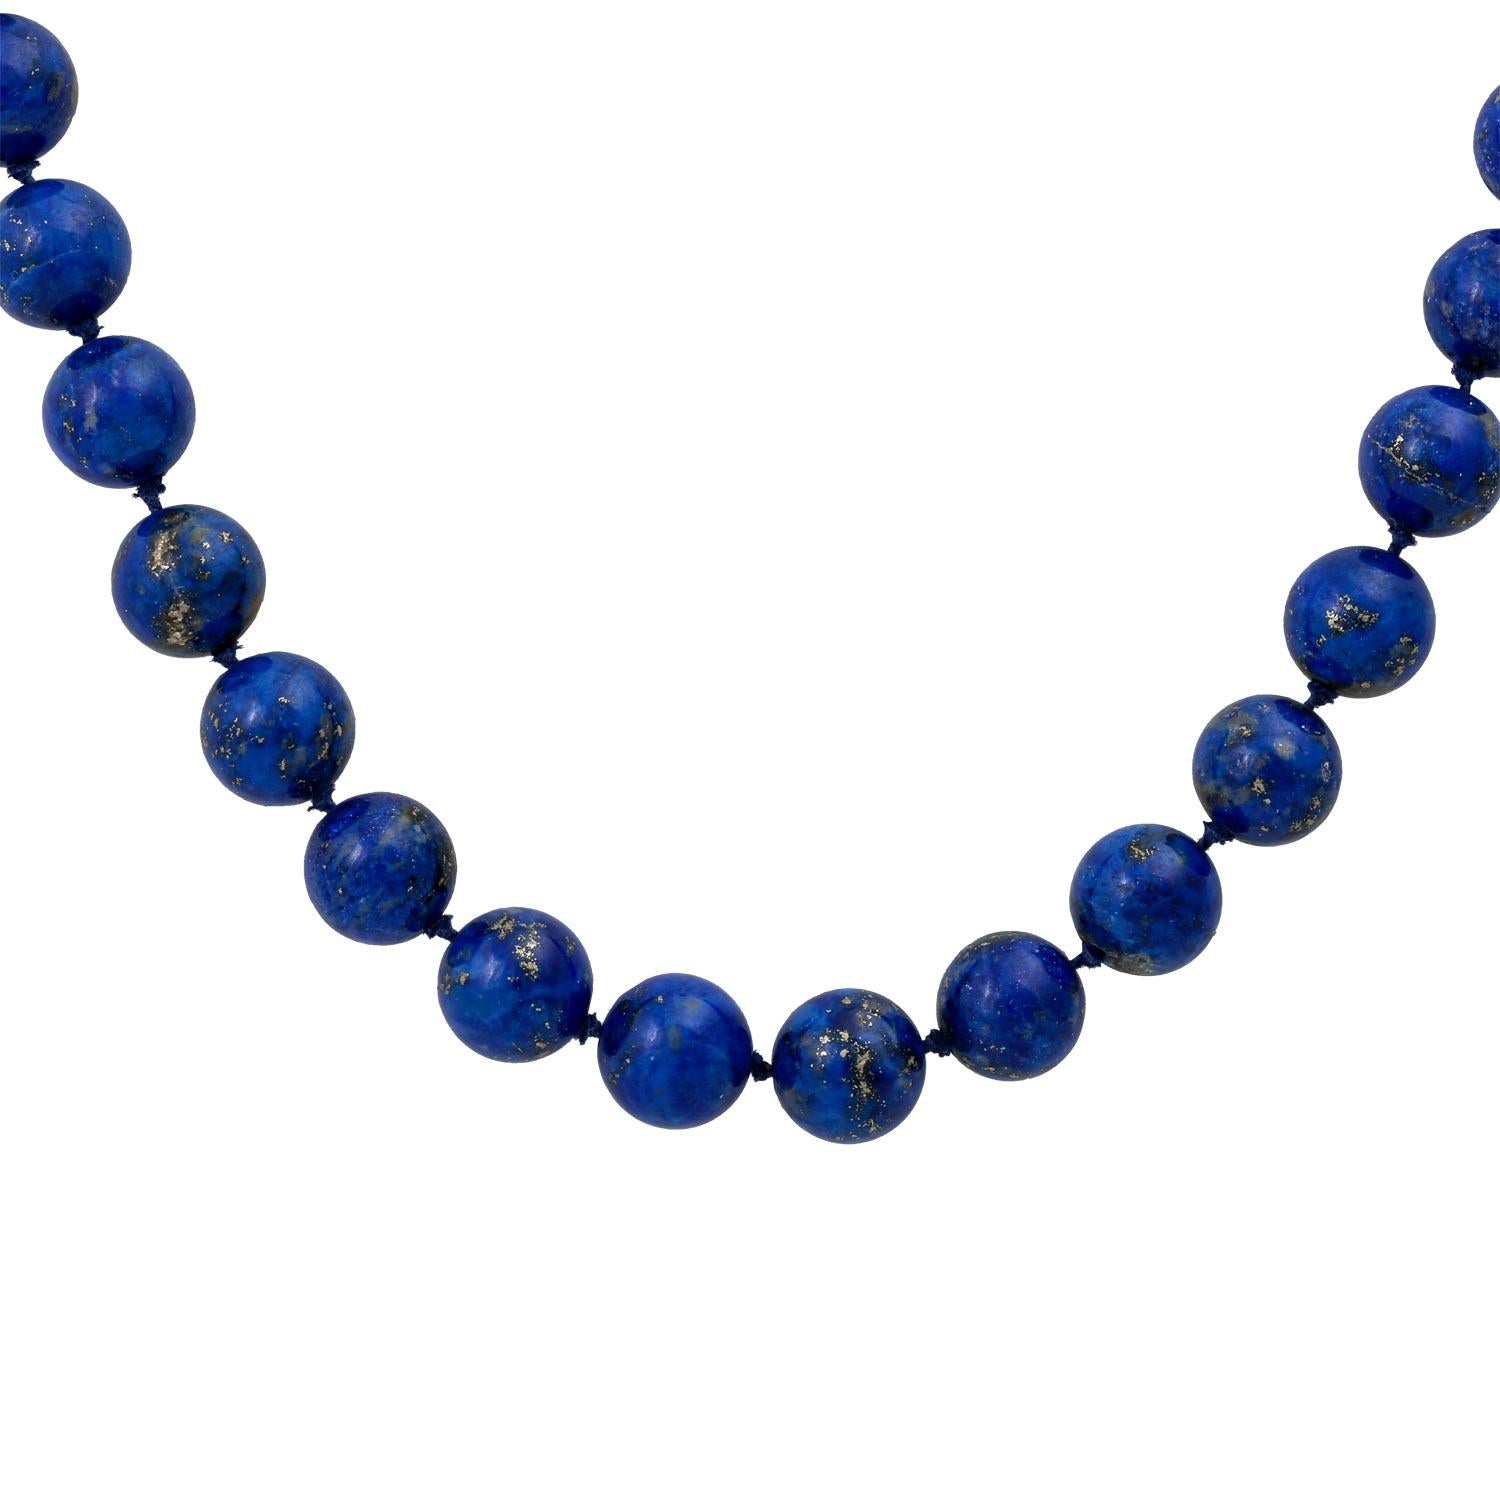 Balls approx. 9.5-10 mm, clasp GG 18K, L: approx. 85 cm, 20./21. Century, slight signs of wear.

 Lapis lazuli necklace, beads approx. 9.5-10 mm, clasp 18K YG, L: approx. 85 cm, 20th/21st century, minor signs of wear.